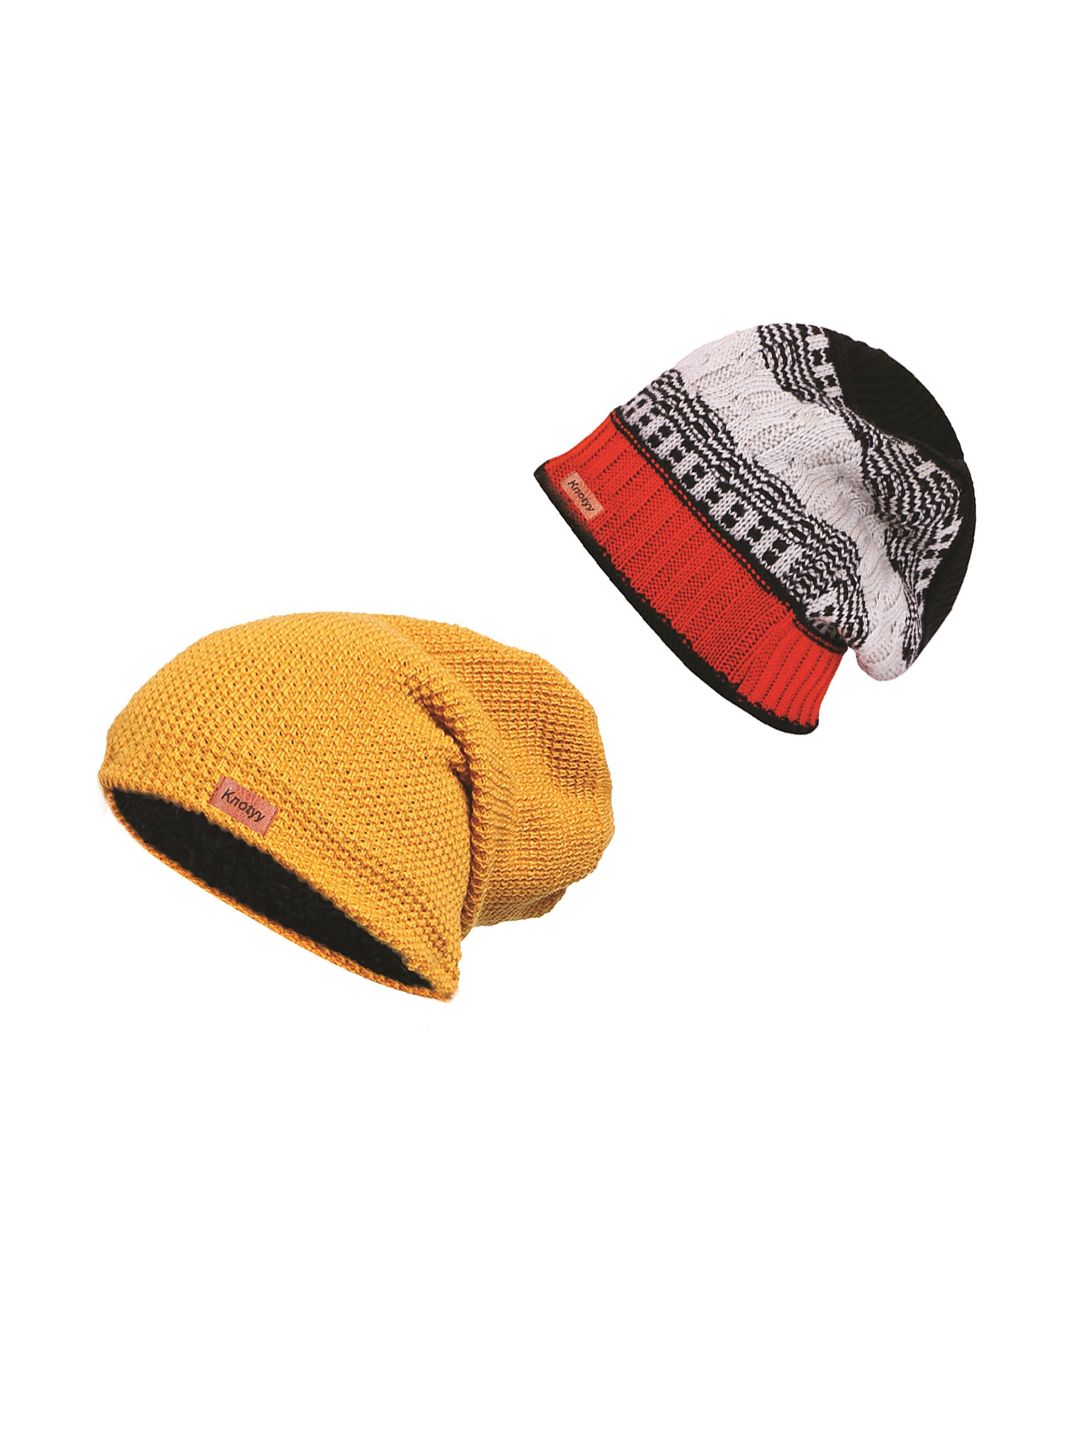 Knotyy Unisex Pack of 2 Woolen Beanie Price in India